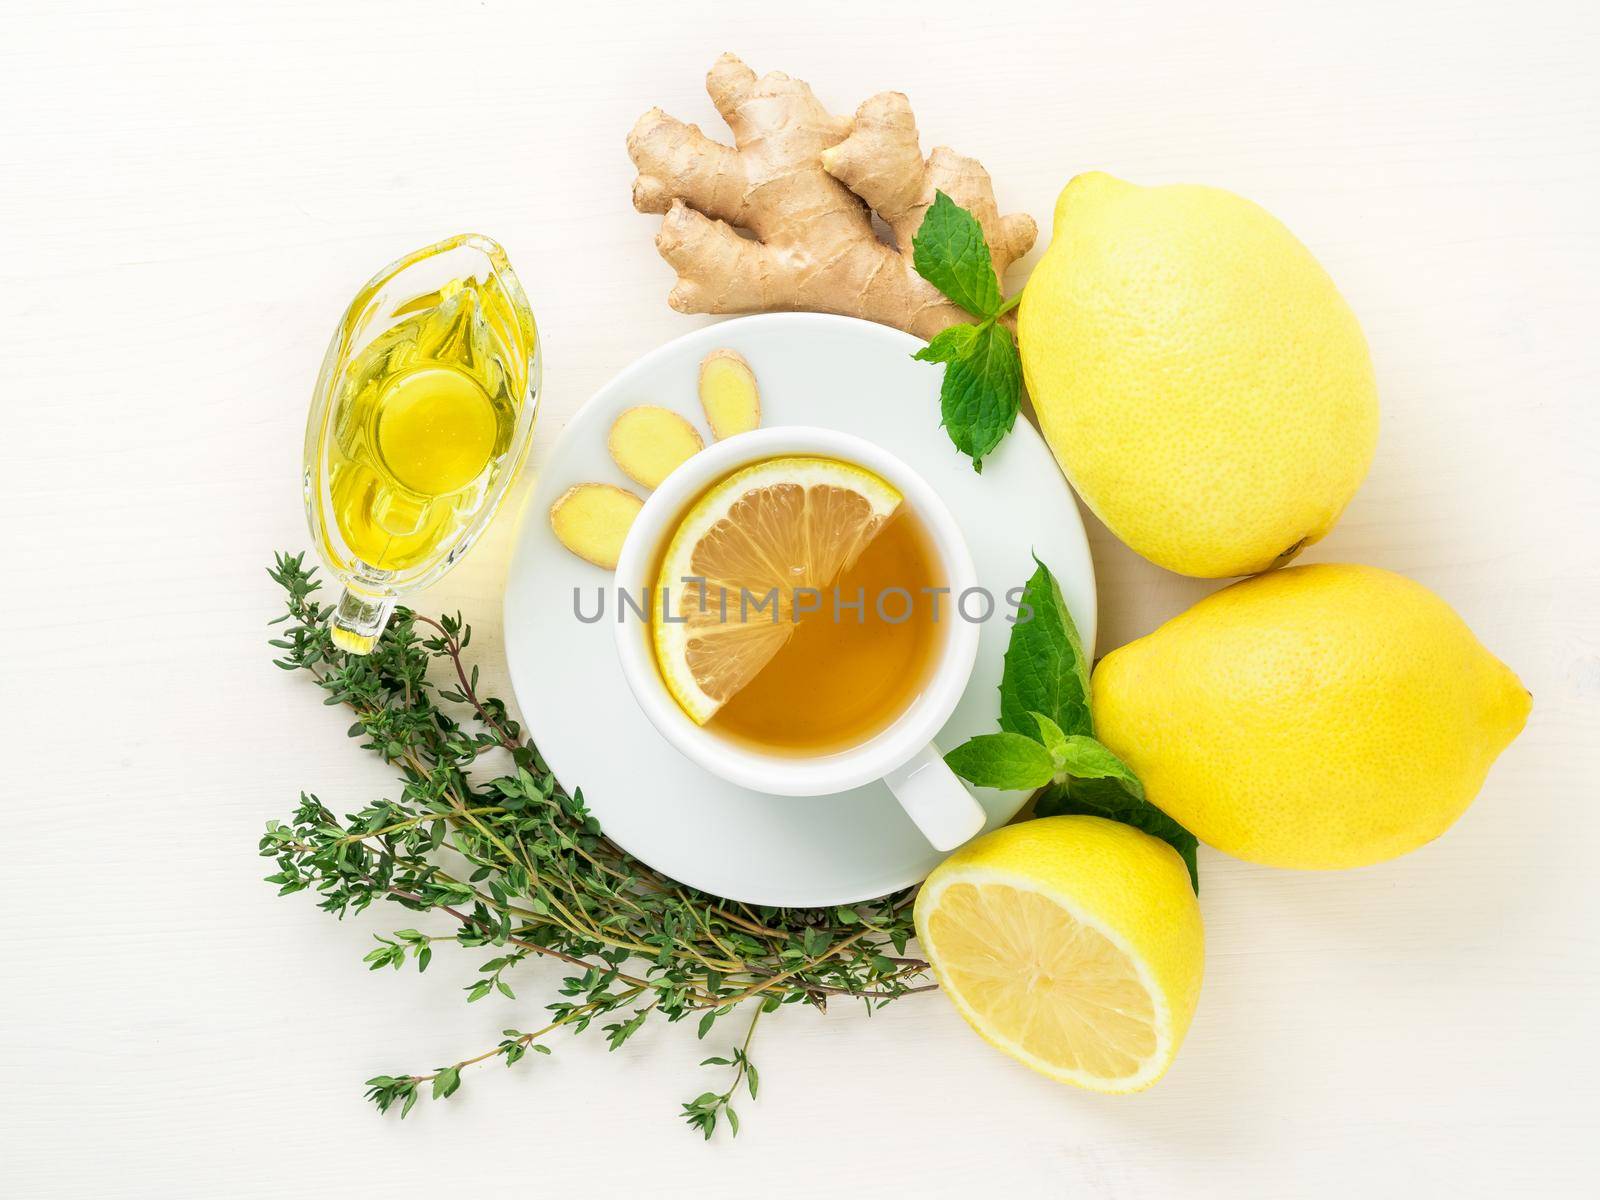 Folk ways to treat colds - cup of tea and a slice of lemon, ginger, mint, honey, herbs, whole lemons and half on a white background, top view. by NataBene